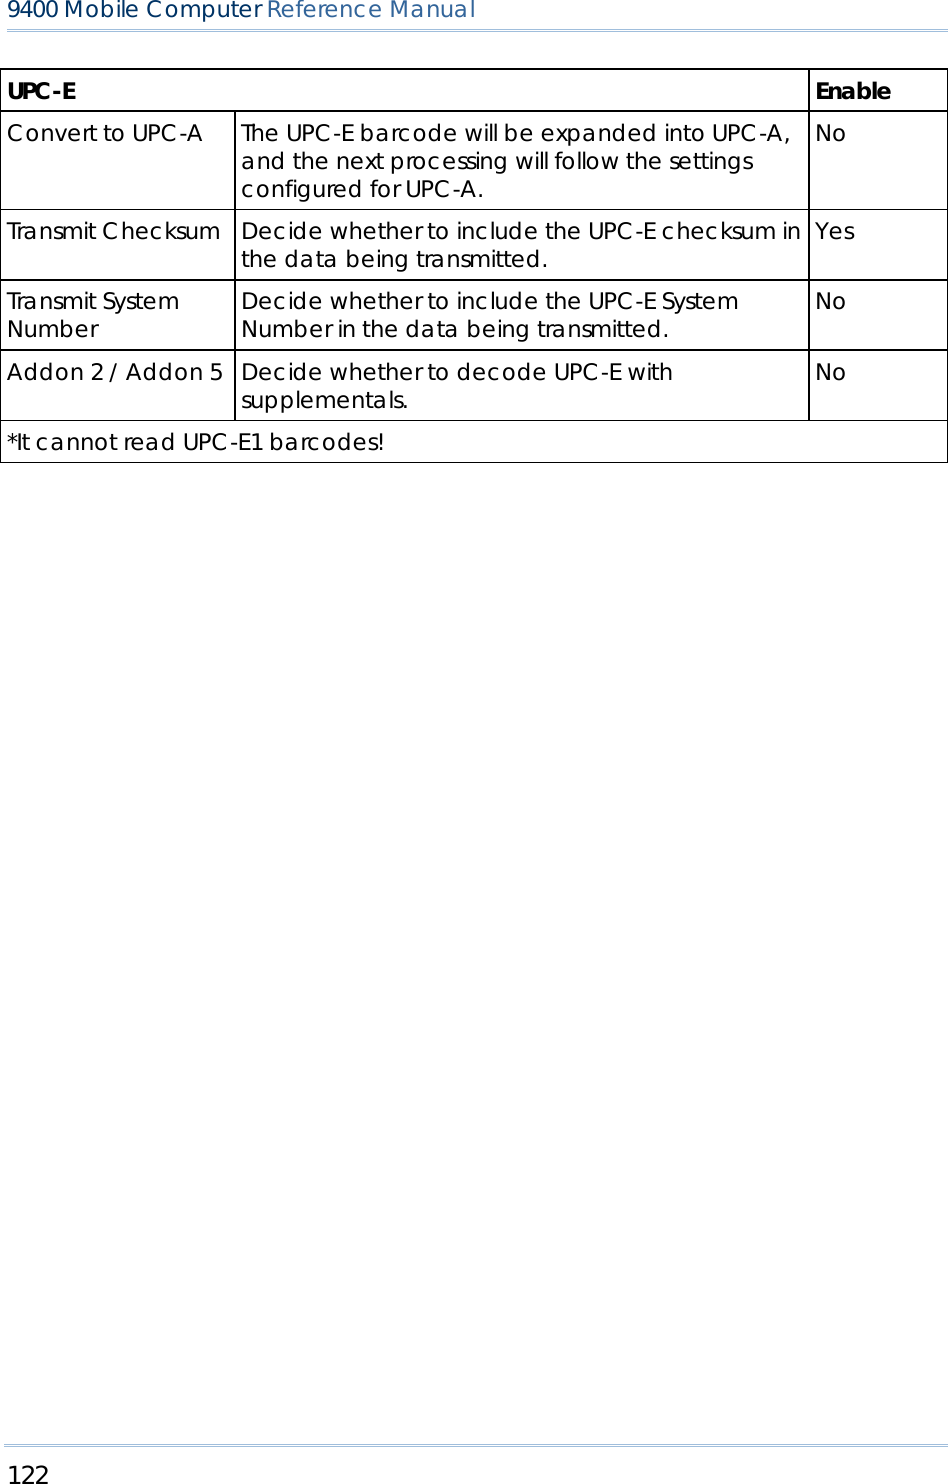 122  9400 Mobile Computer Reference Manual  UPC-E Enable Convert to UPC-A  The UPC-E barcode will be expanded into UPC-A, and the next processing will follow the settings configured for UPC-A. No Transmit Checksum  Decide whether to include the UPC-E checksum in the data being transmitted.  Yes Transmit System Number  Decide whether to include the UPC-E System Number in the data being transmitted.  No Addon 2 / Addon 5  Decide whether to decode UPC-E with supplementals.  No *It cannot read UPC-E1 barcodes!      